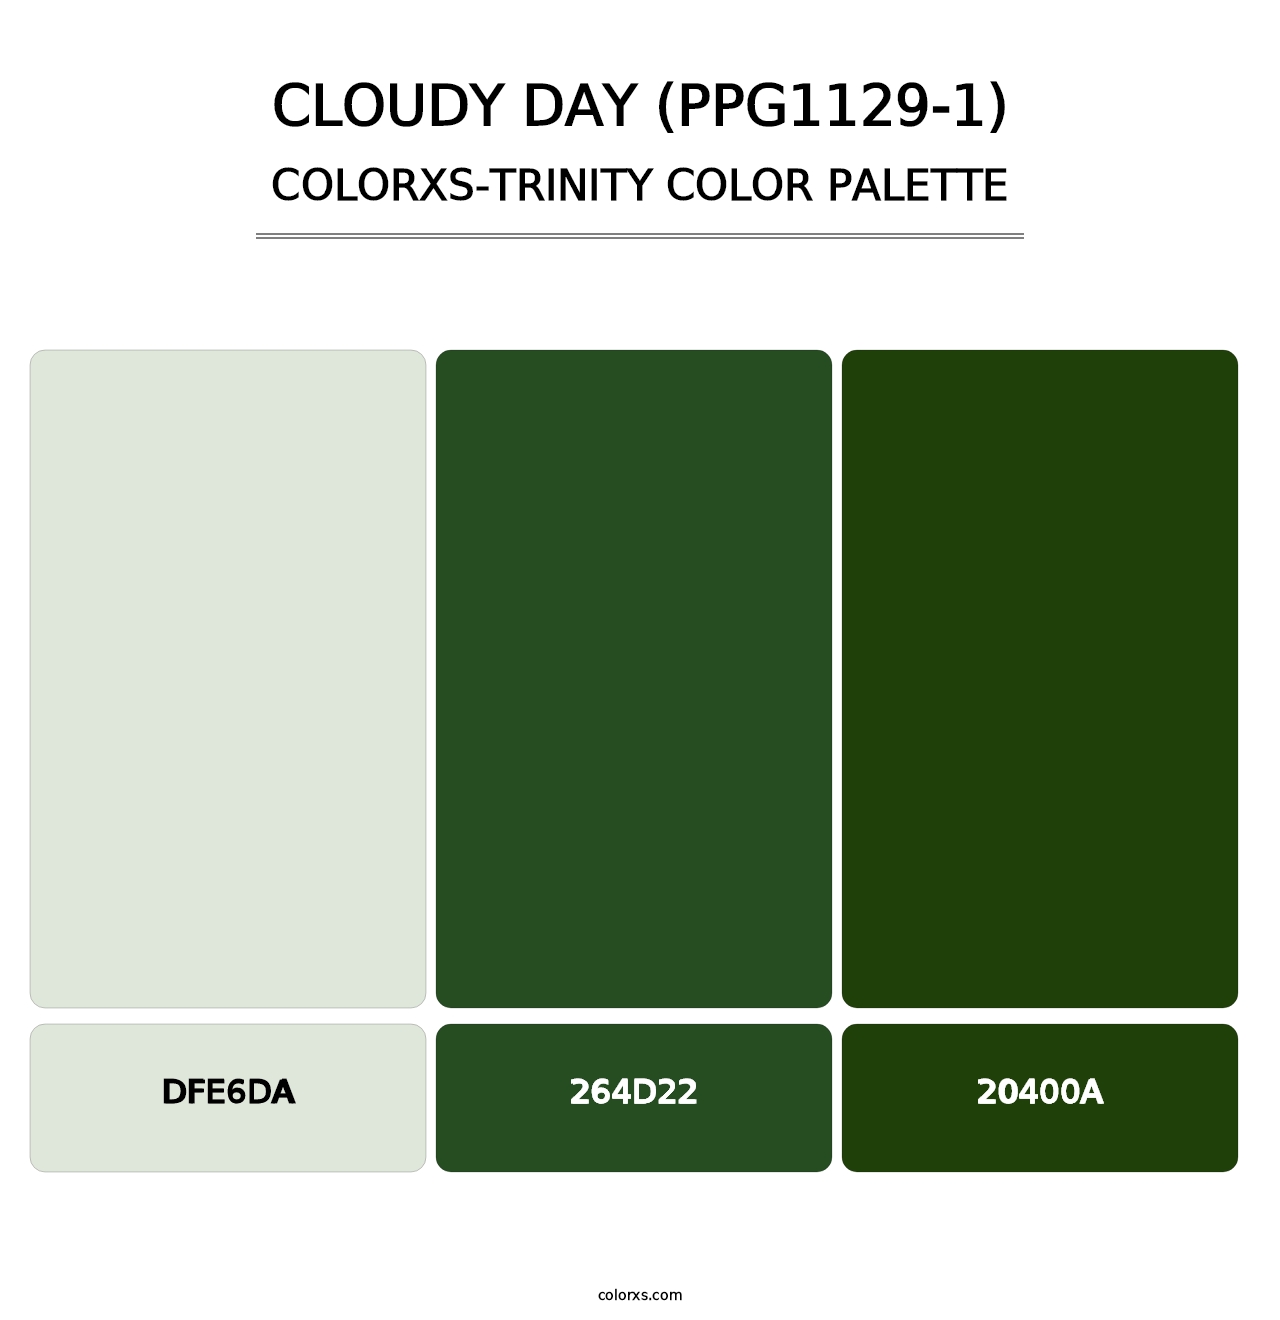 Cloudy Day (PPG1129-1) - Colorxs Trinity Palette